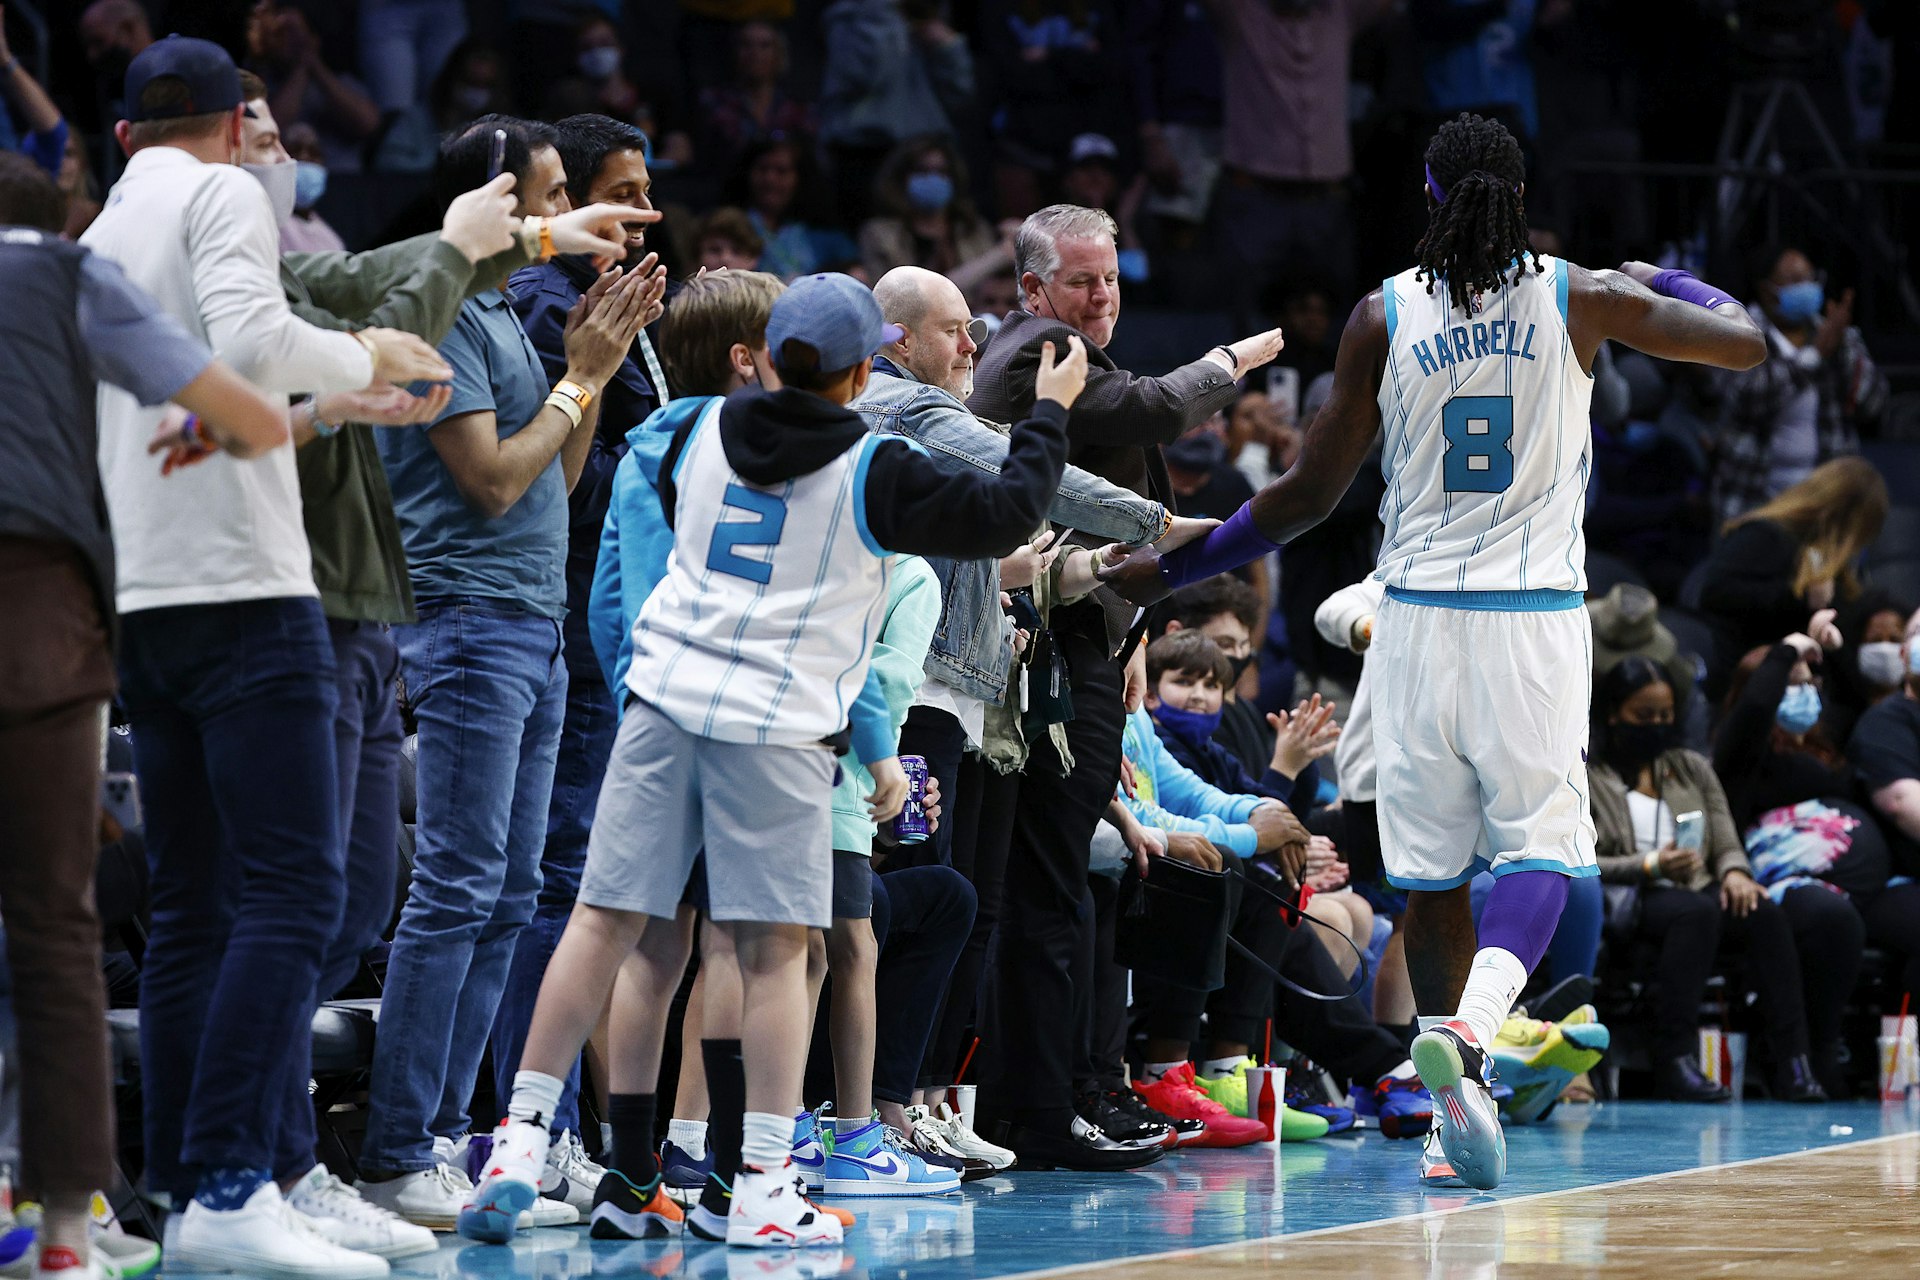 A Charlotte Hornets NBA player high-fives fans as he runs down the court during a game in Charlotte. 